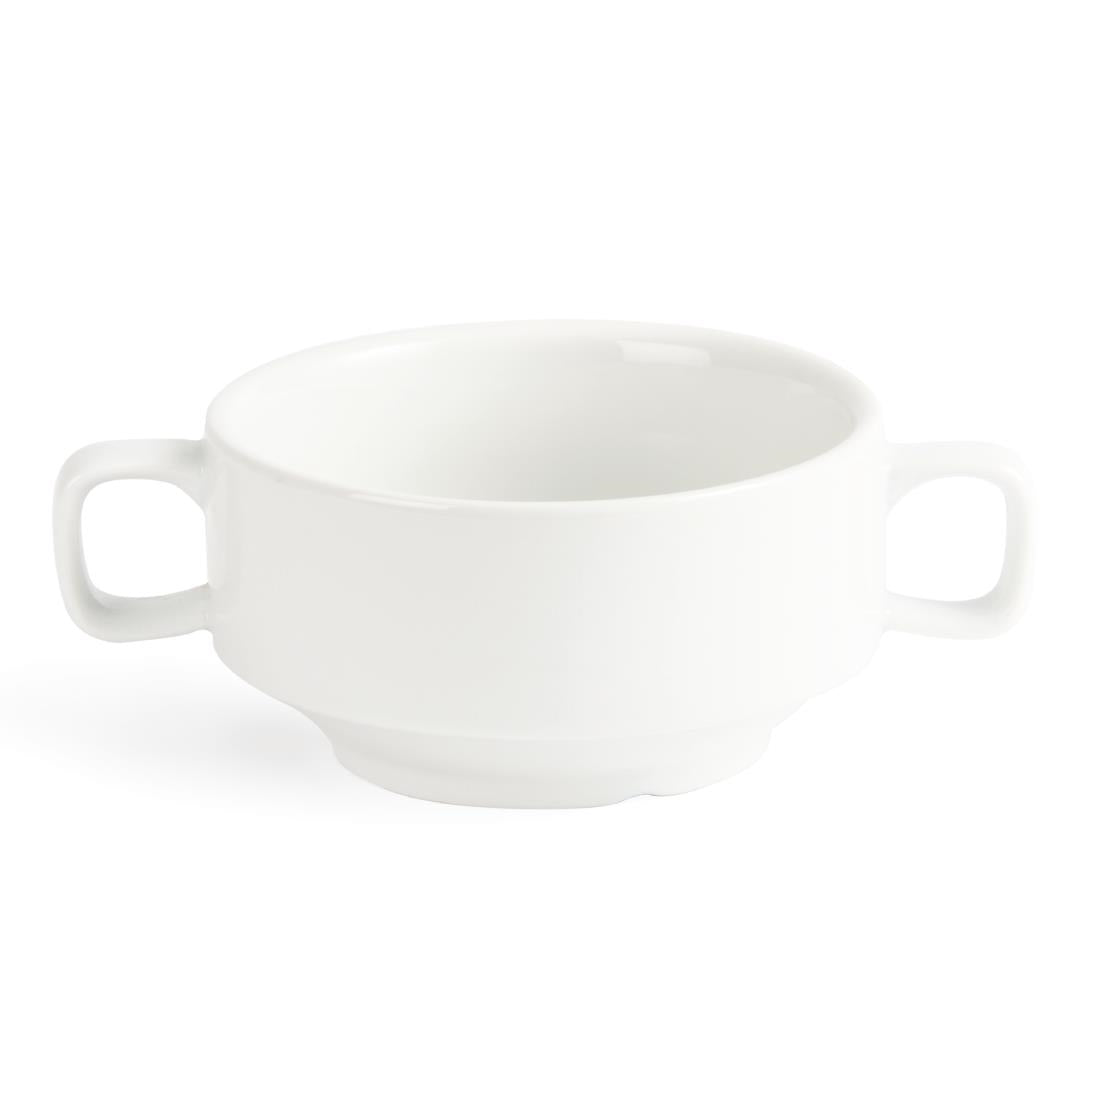 C239 Olympia Whiteware Soup Bowls With Handles 400ml (Pack of 6)